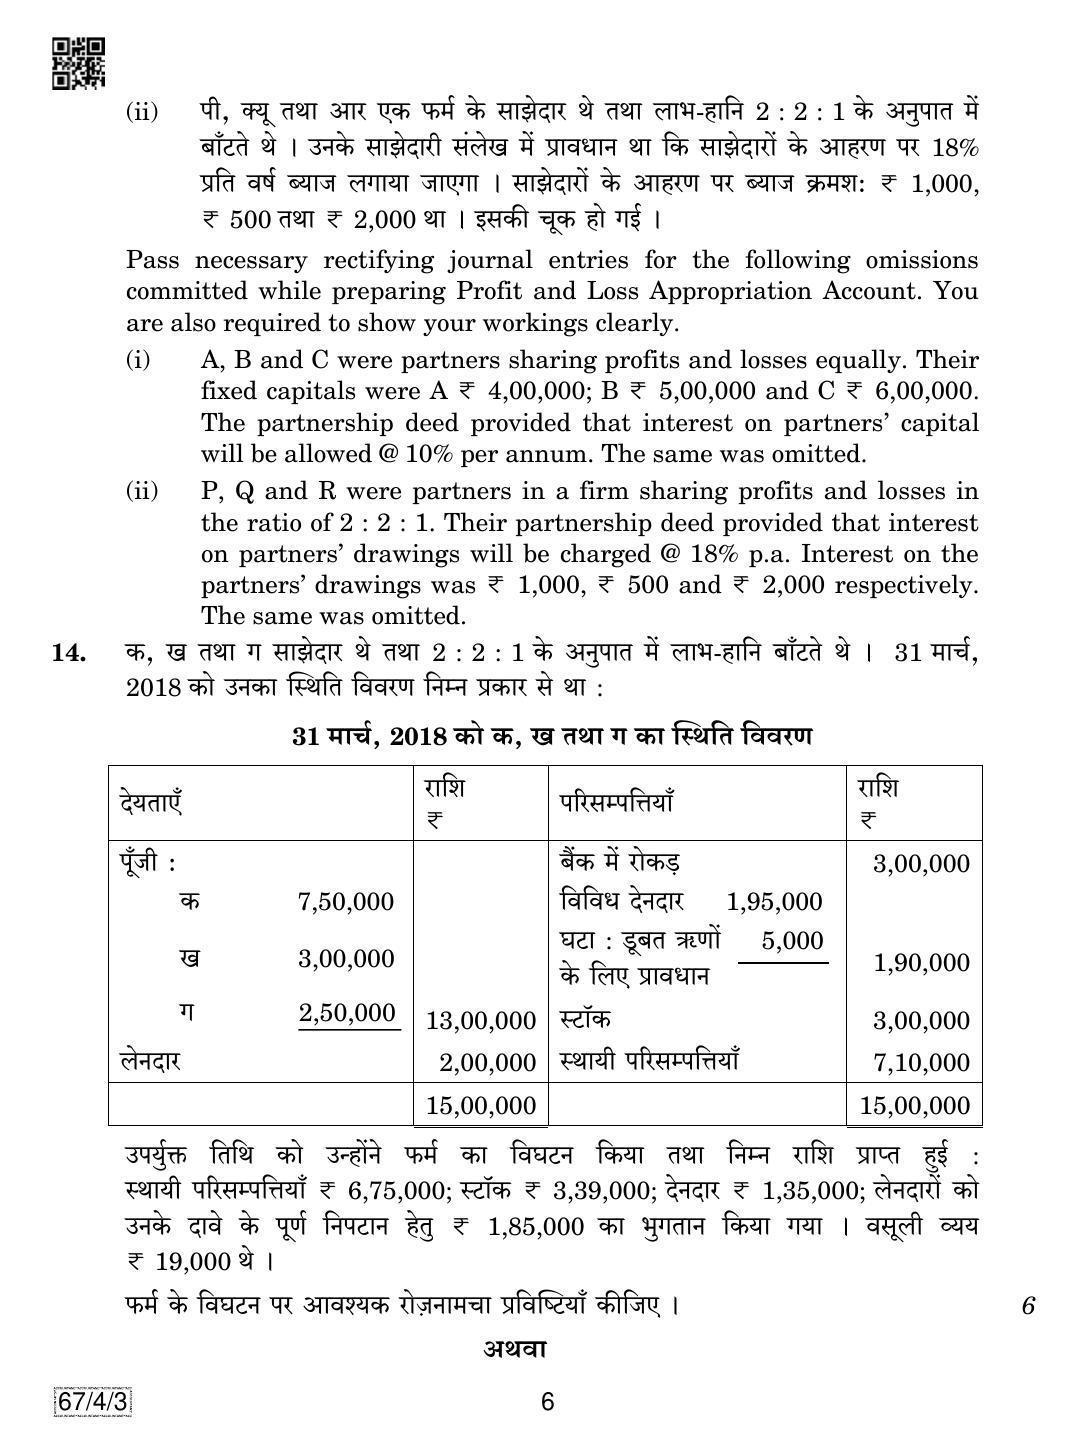 CBSE Class 12 67-4-3 Accountancy 2019 Question Paper - Page 6